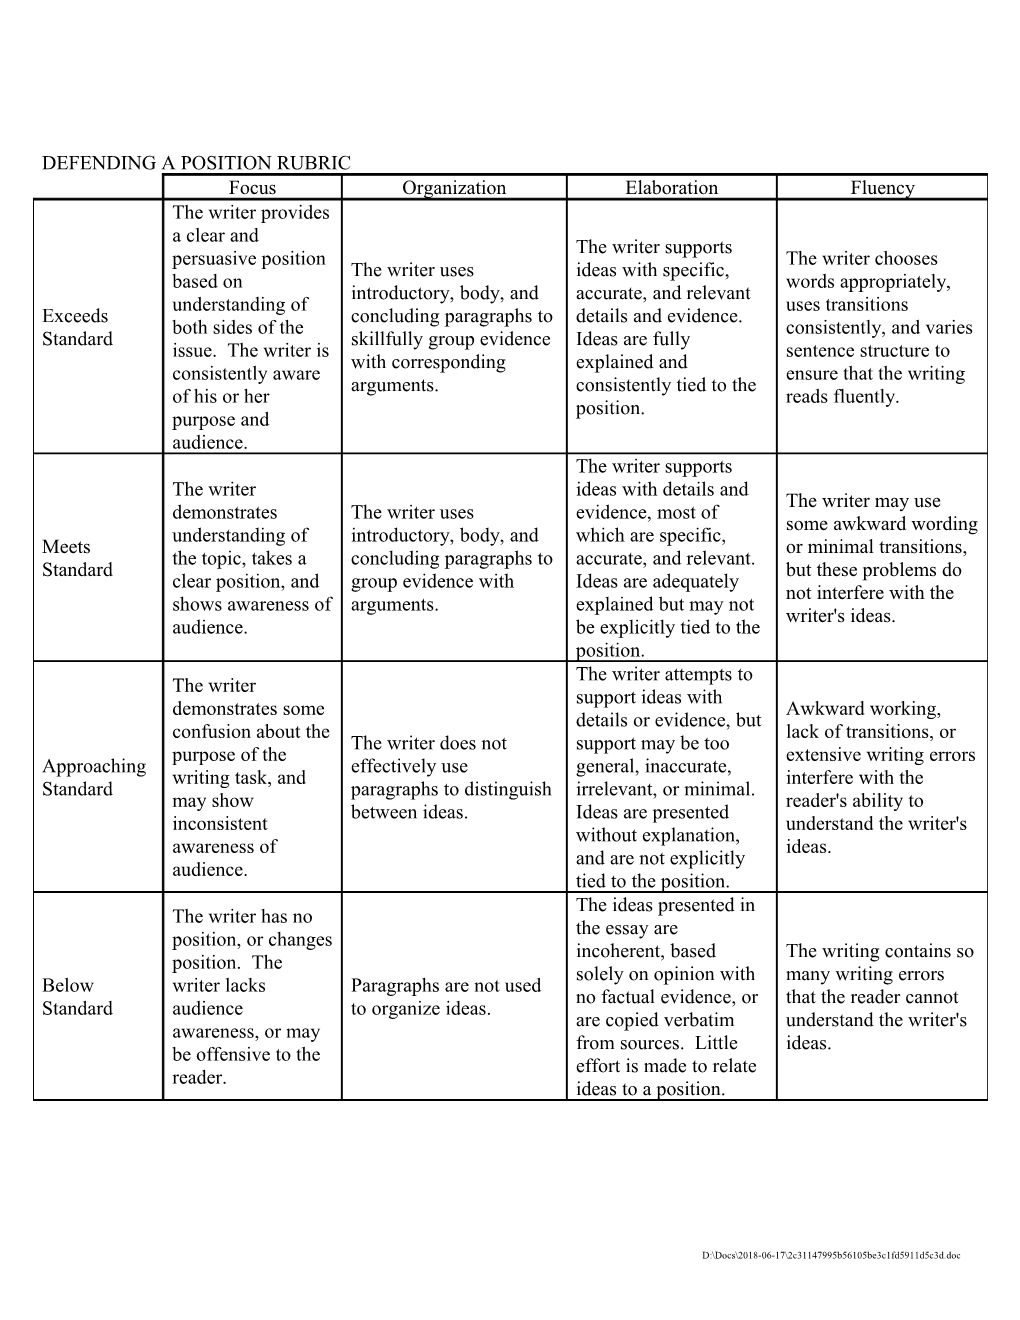 Defending a Position Rubric